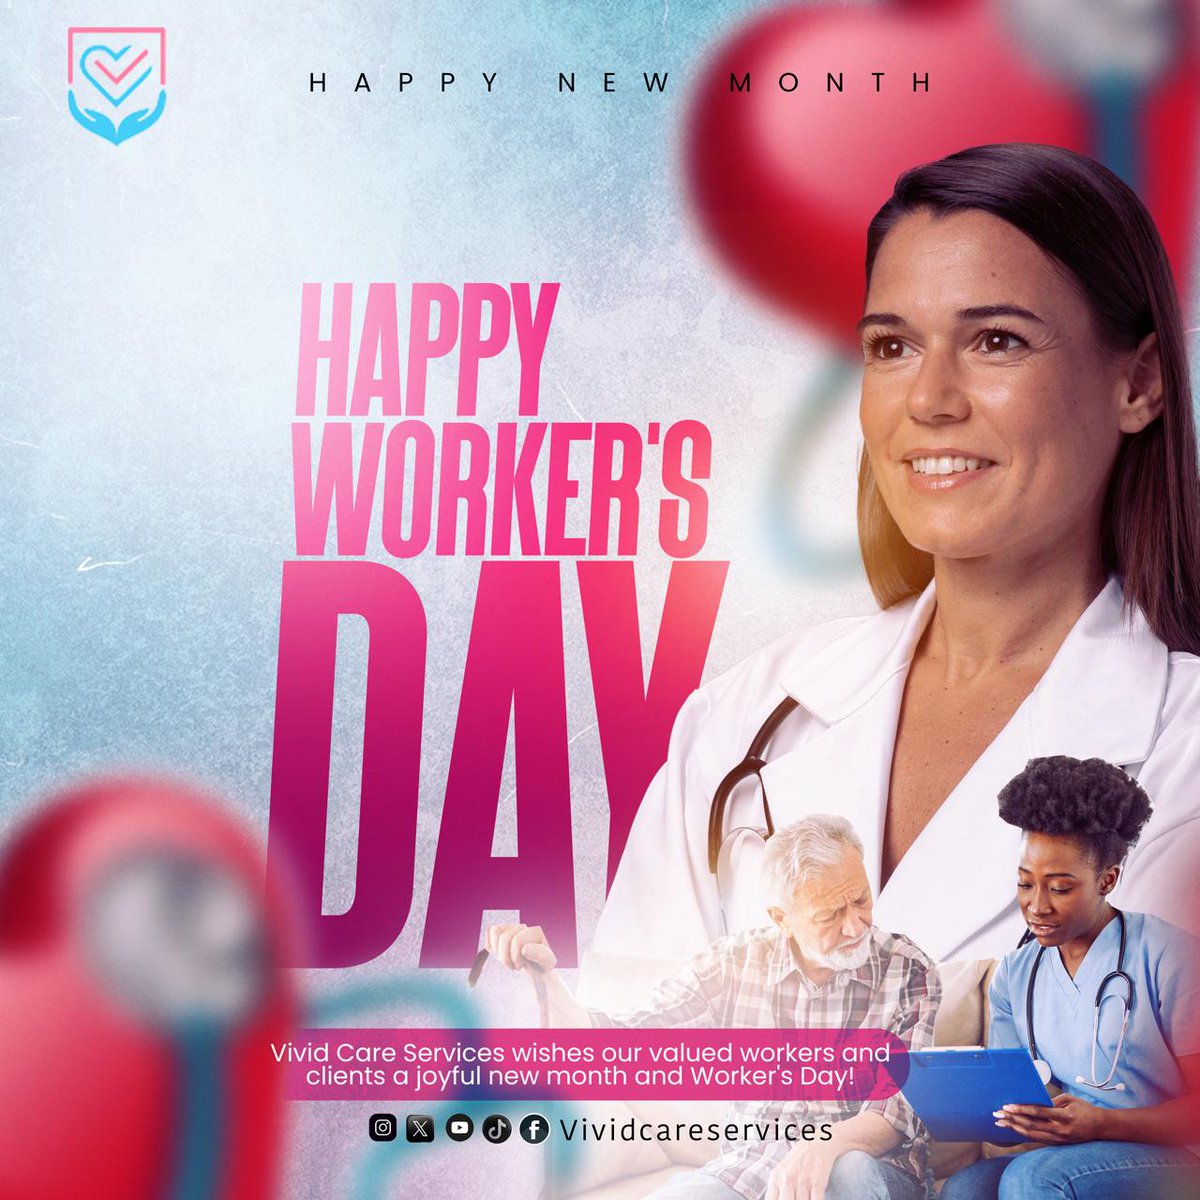 Happy new month to everyone and happy workers day! 
We appreciate all workers especially those in the healthcare sector for the great work they do for those in need!🌟
#vividcareservices #domiciliarycare #respitecare #workersday #appreciation #workerappreciation